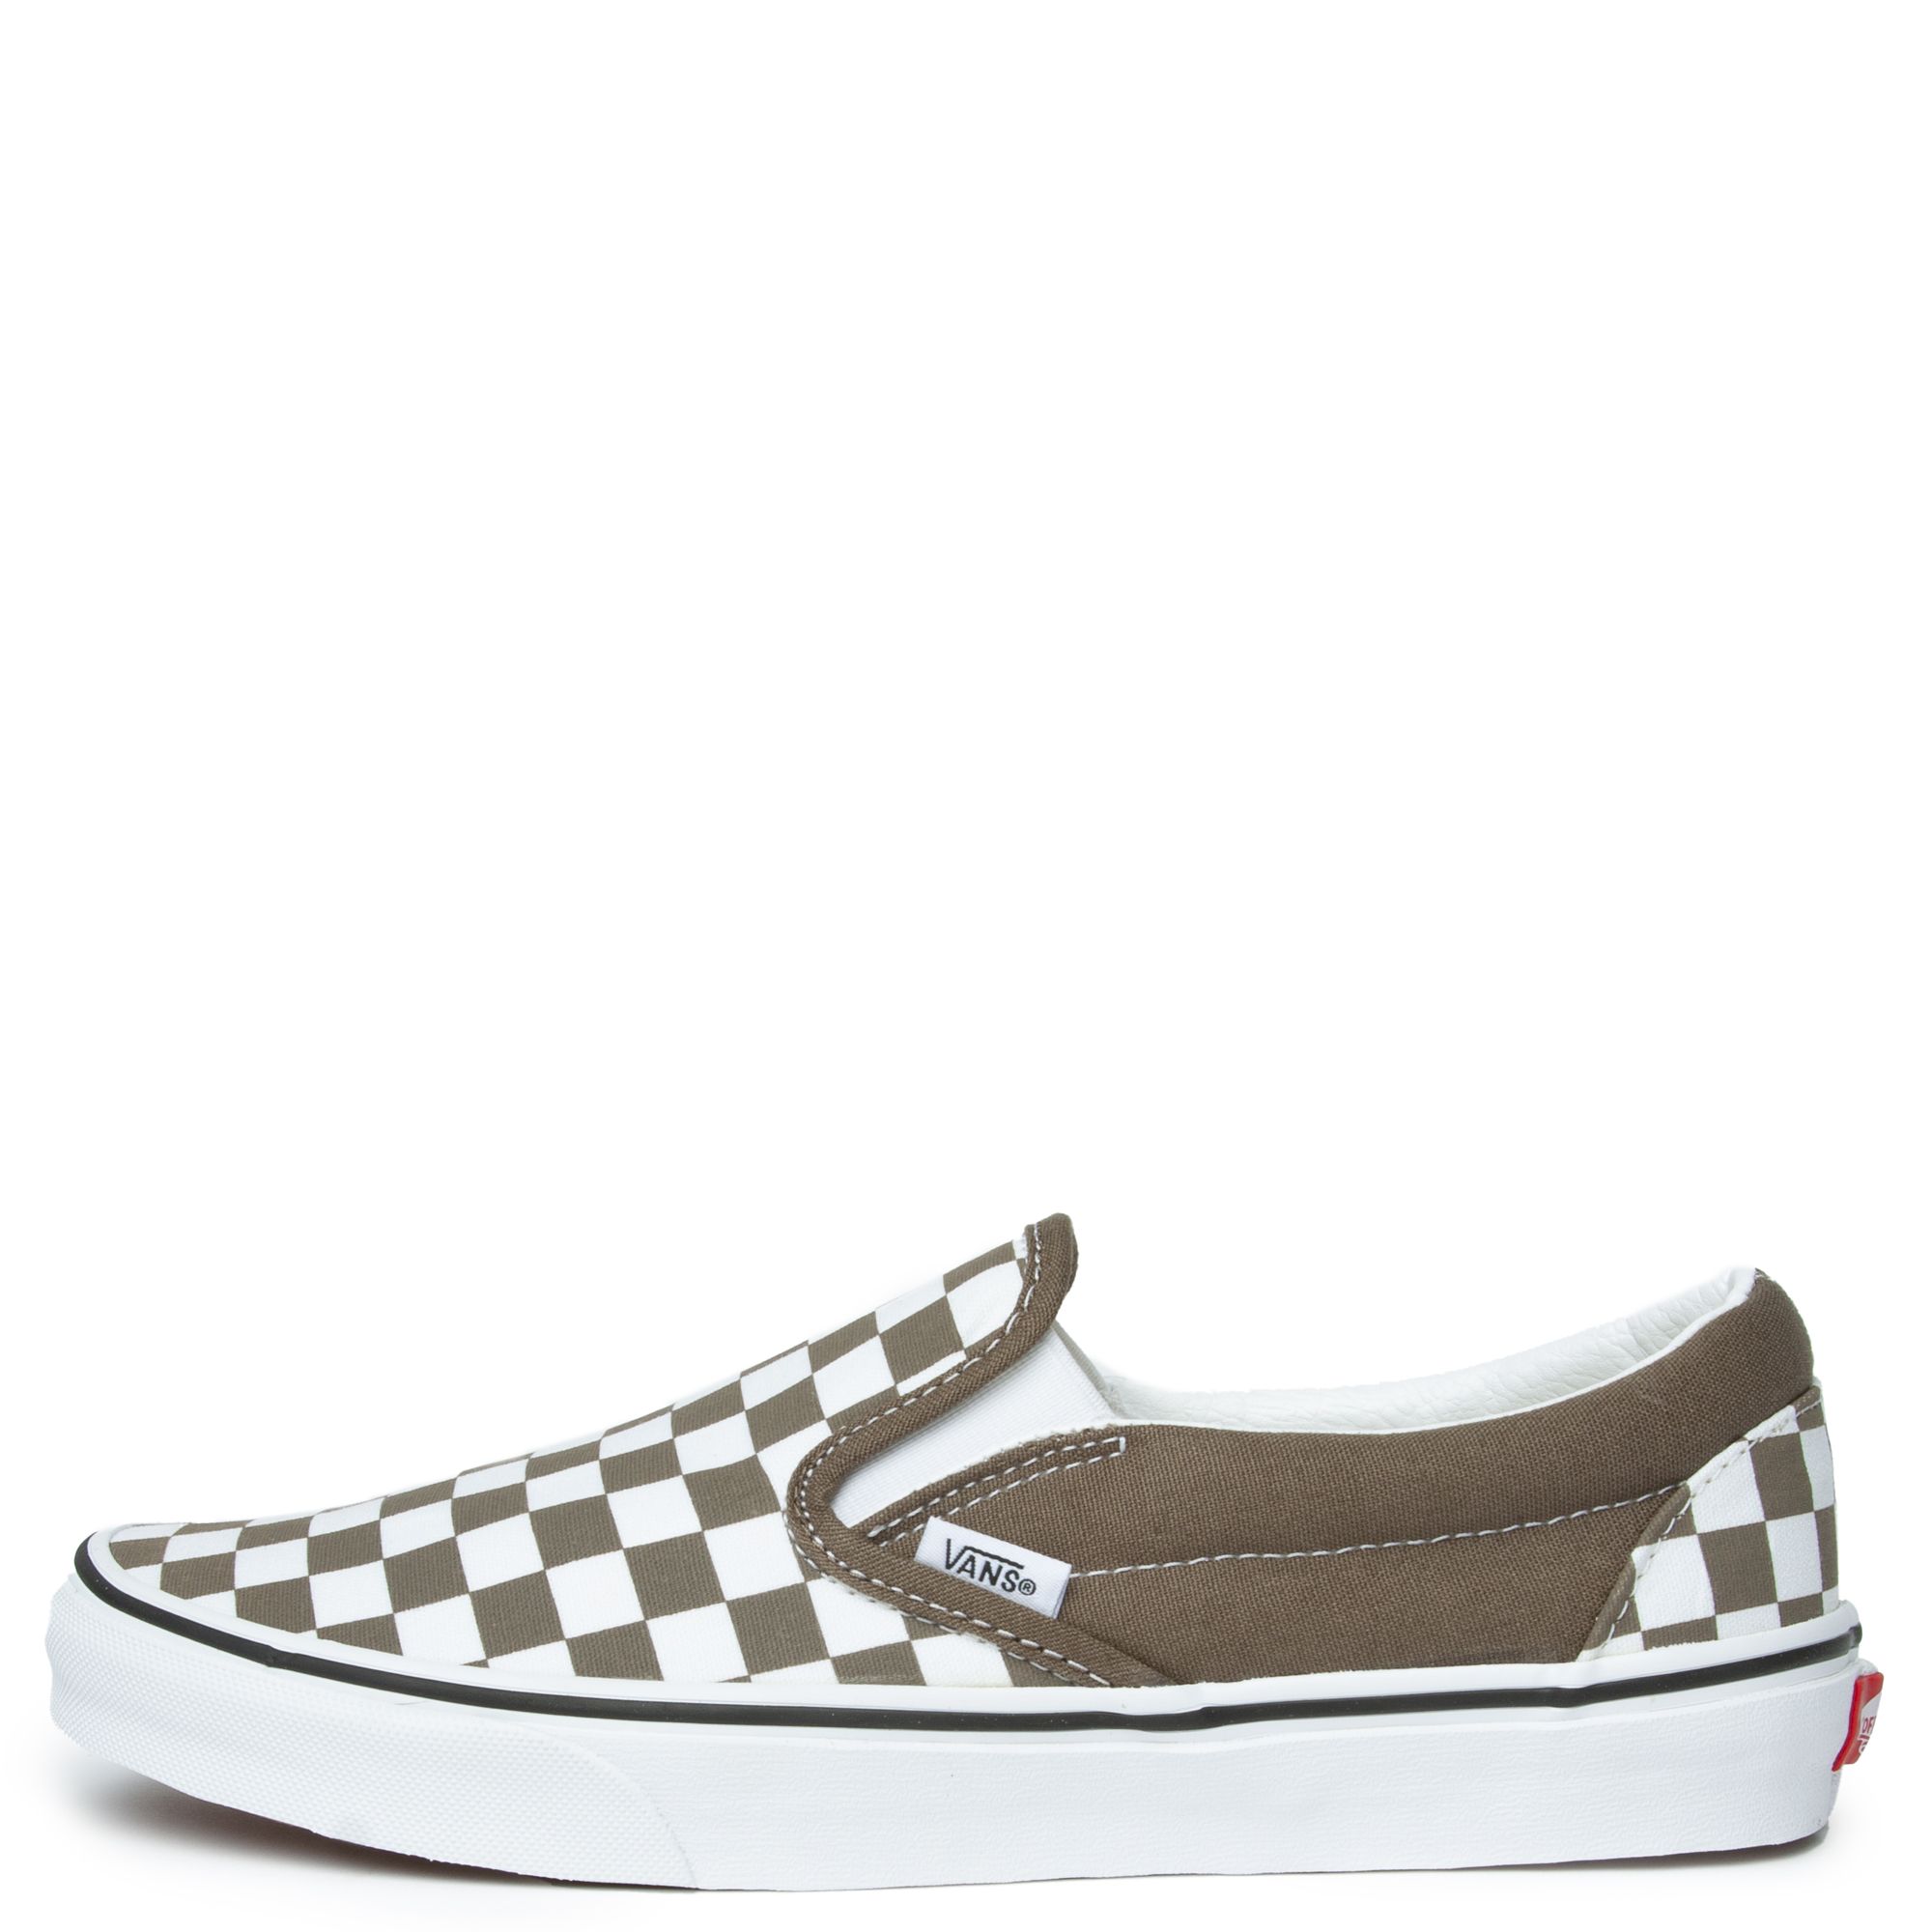 Vans Checkerboard Classic Slip-On Color Theory Checkerboard Walnut